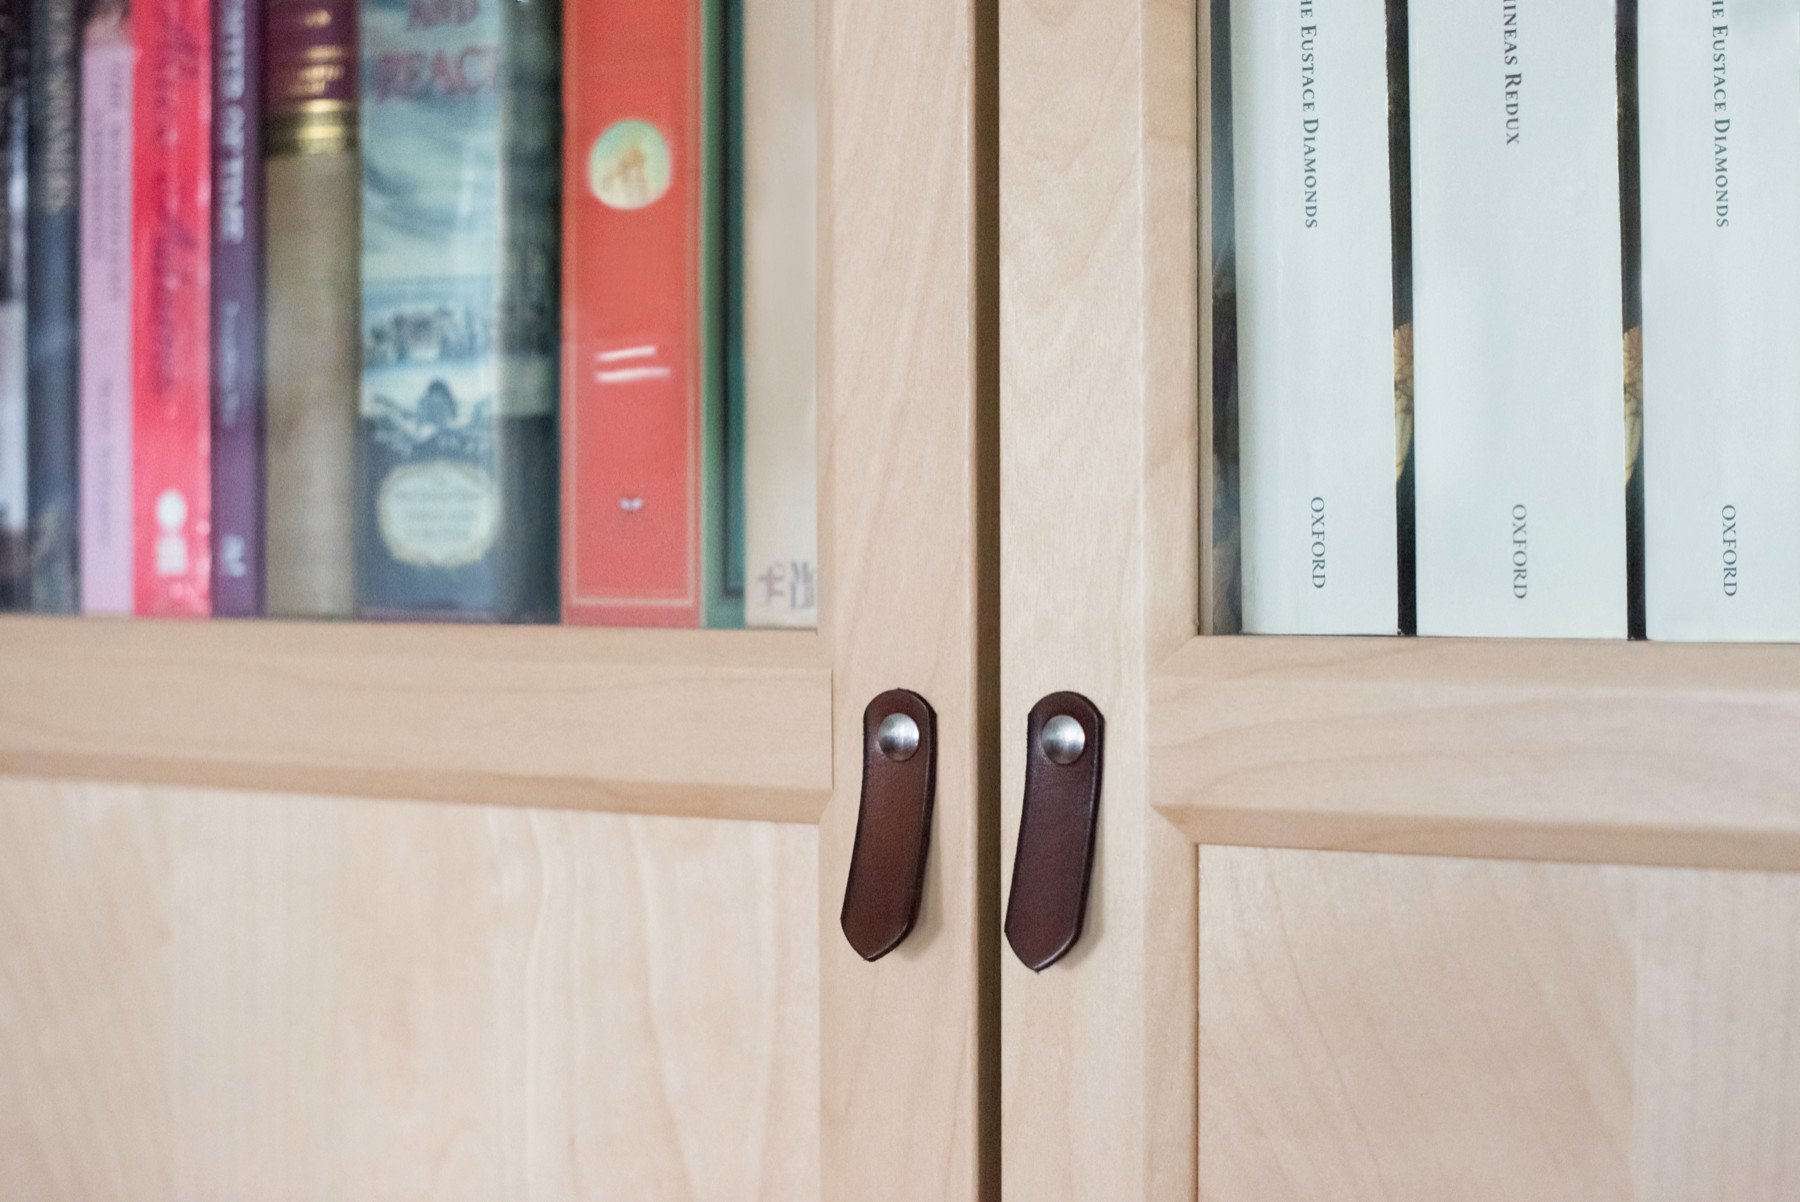 Ikea Leather Tab Pulls On Billy, Ikea Billy Bookcase Cherry Wood